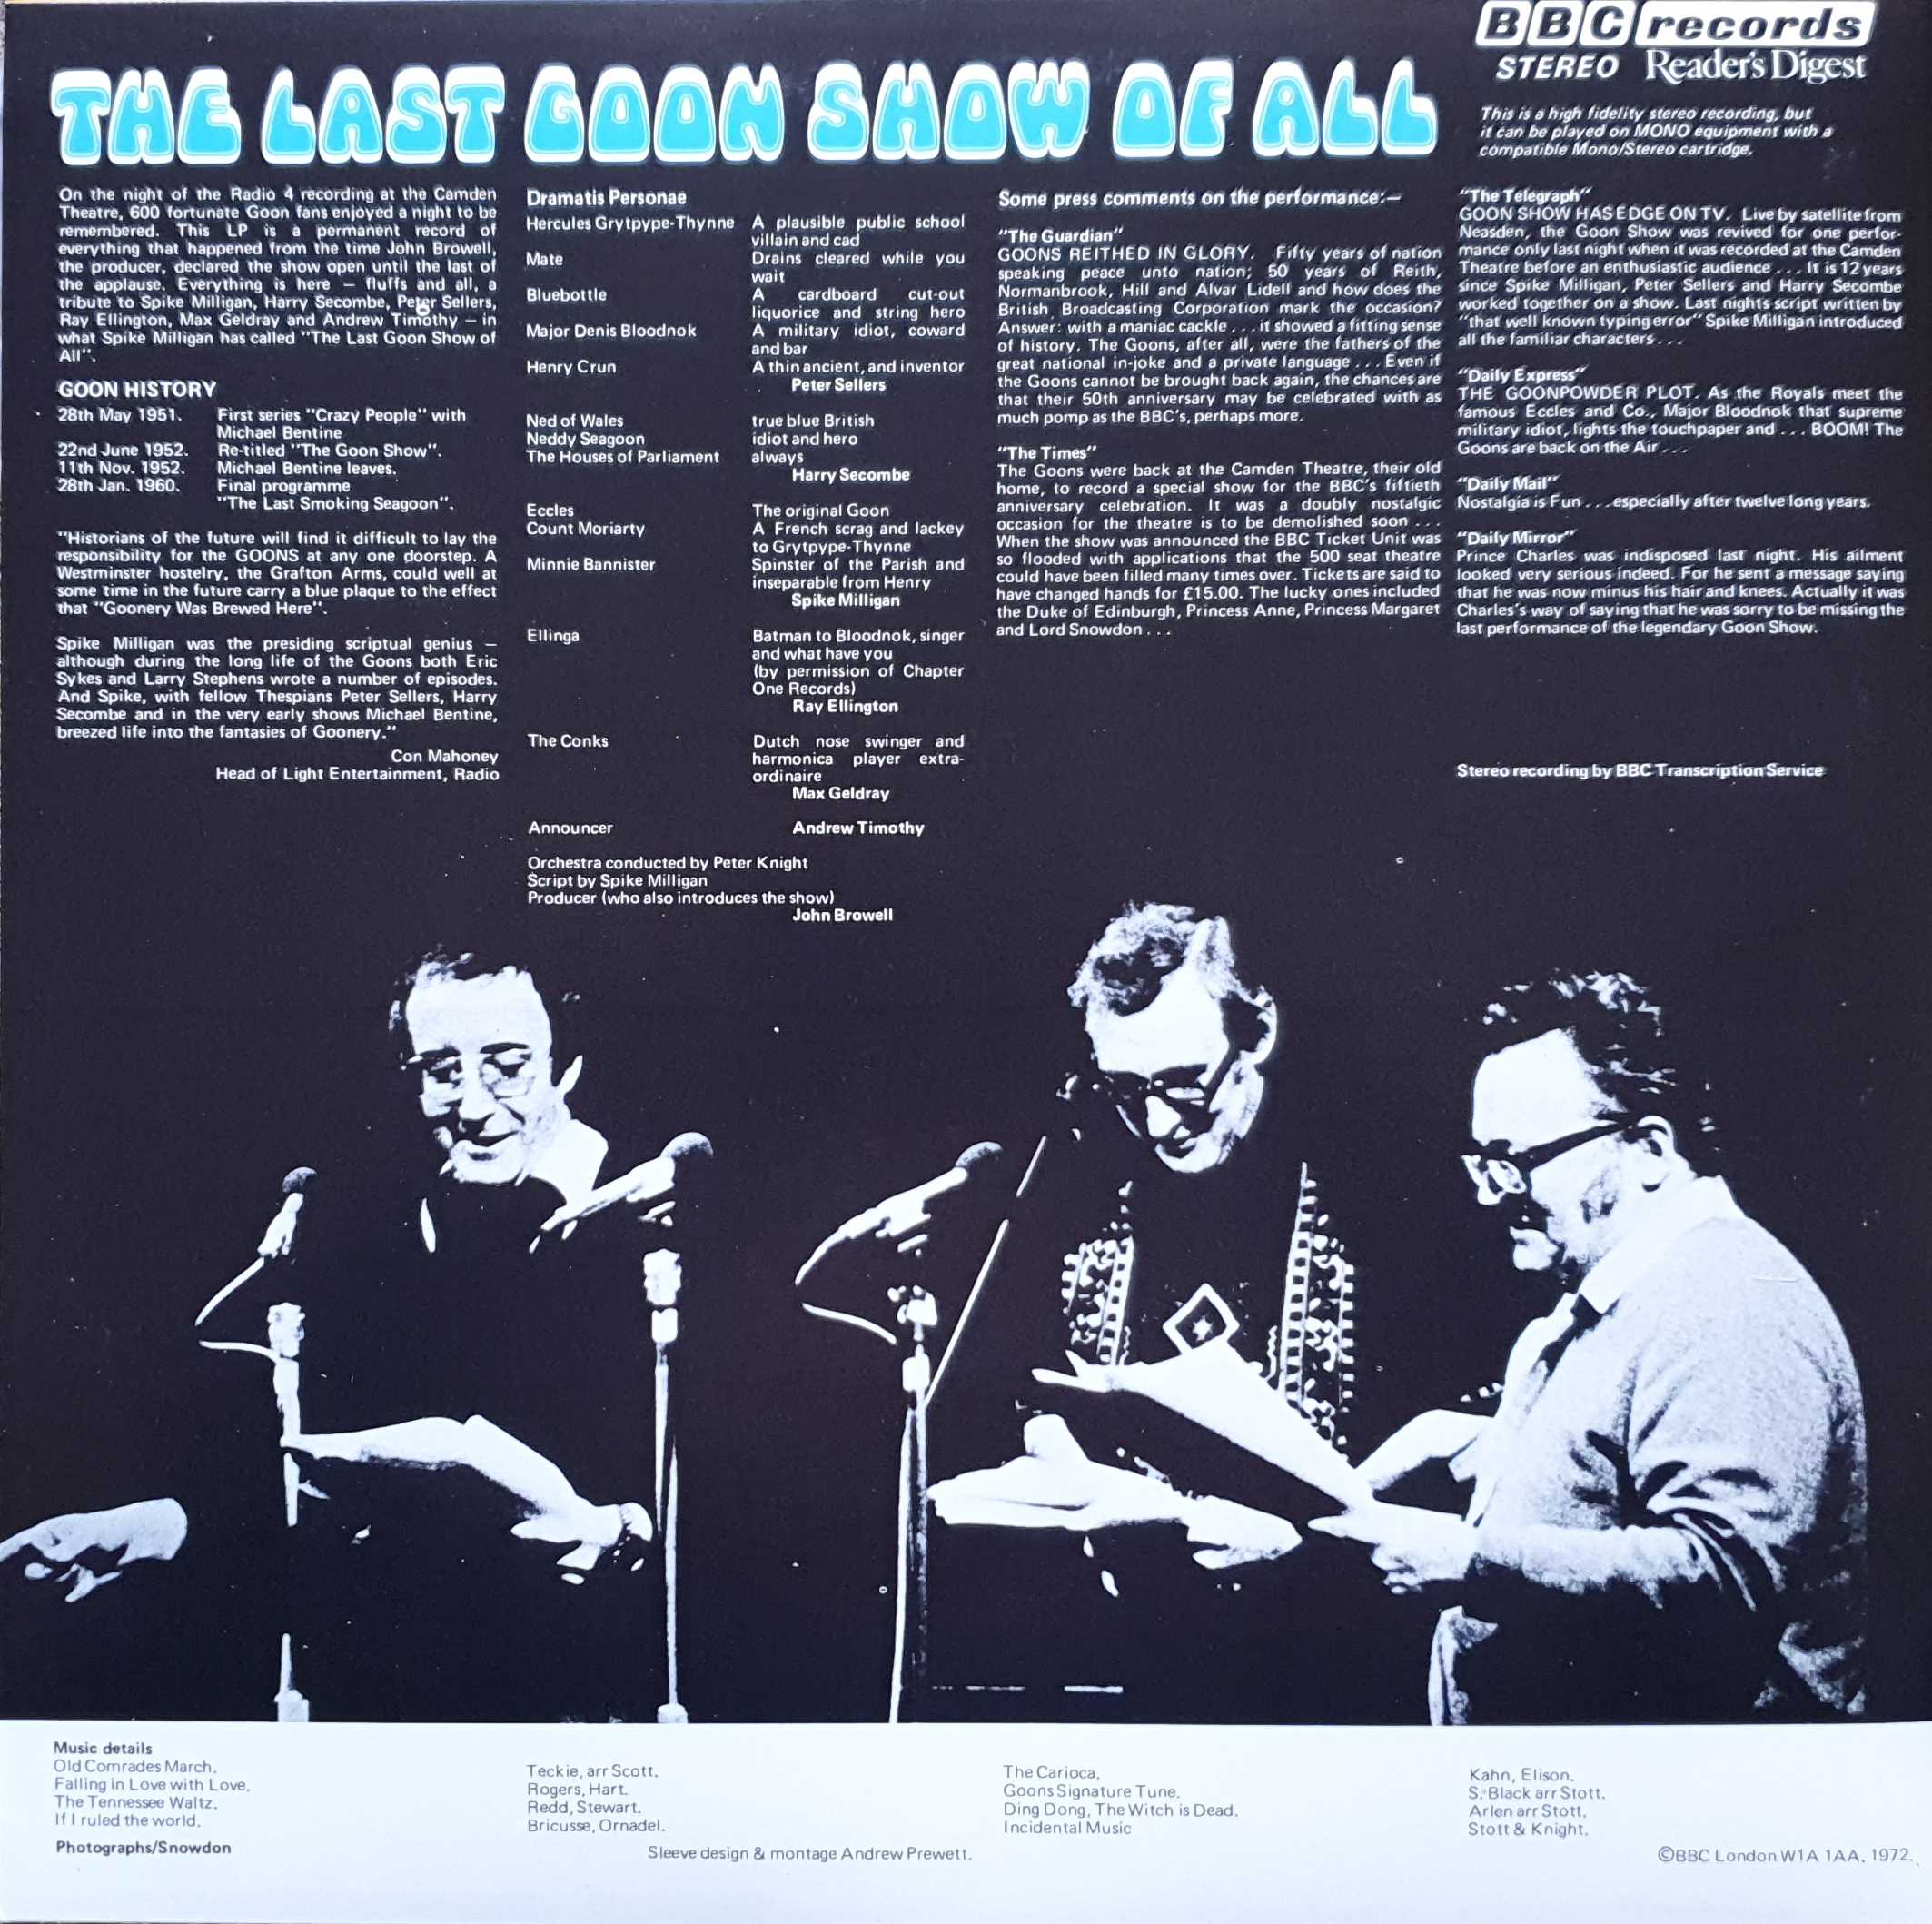 Picture of RD4-358-2 The last Goon Show of all by artist Spike Milligan from the BBC records and Tapes library